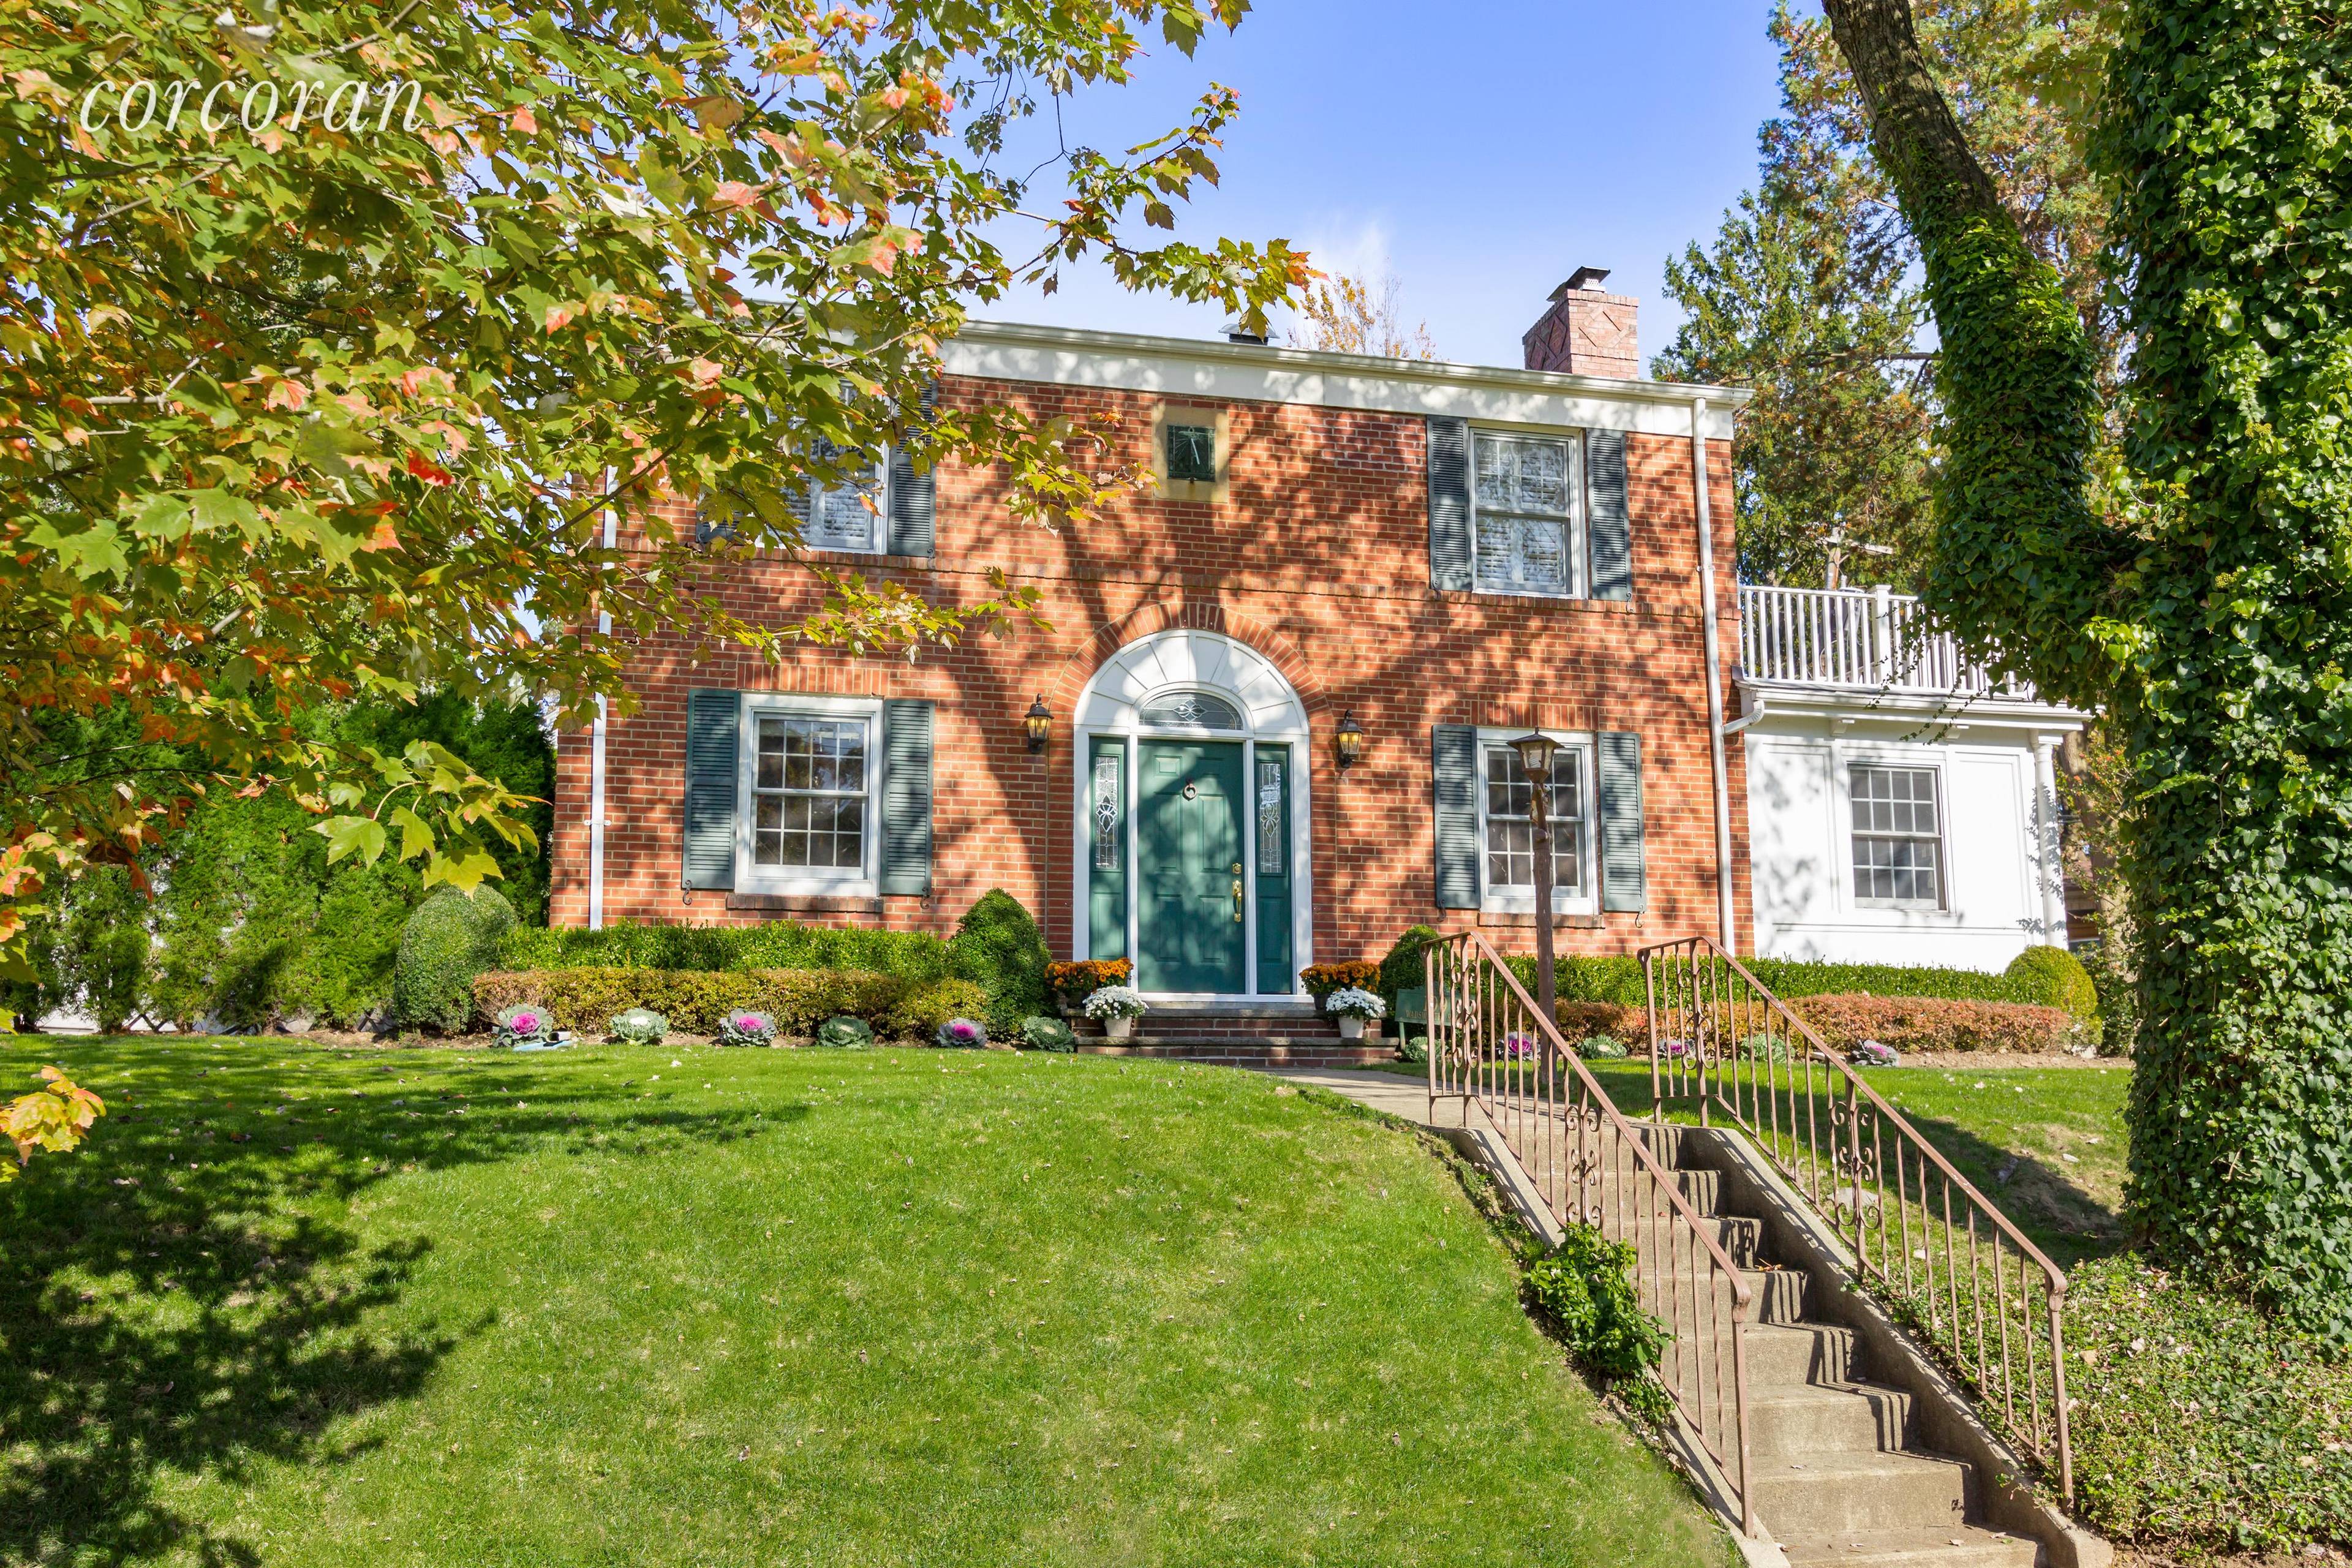 BEAUTIFULLY RENOVATED Center Hall Colonial in Shore Acres, Staten Island, one of the most coveted waterfront neighborhoods in all of New York City.